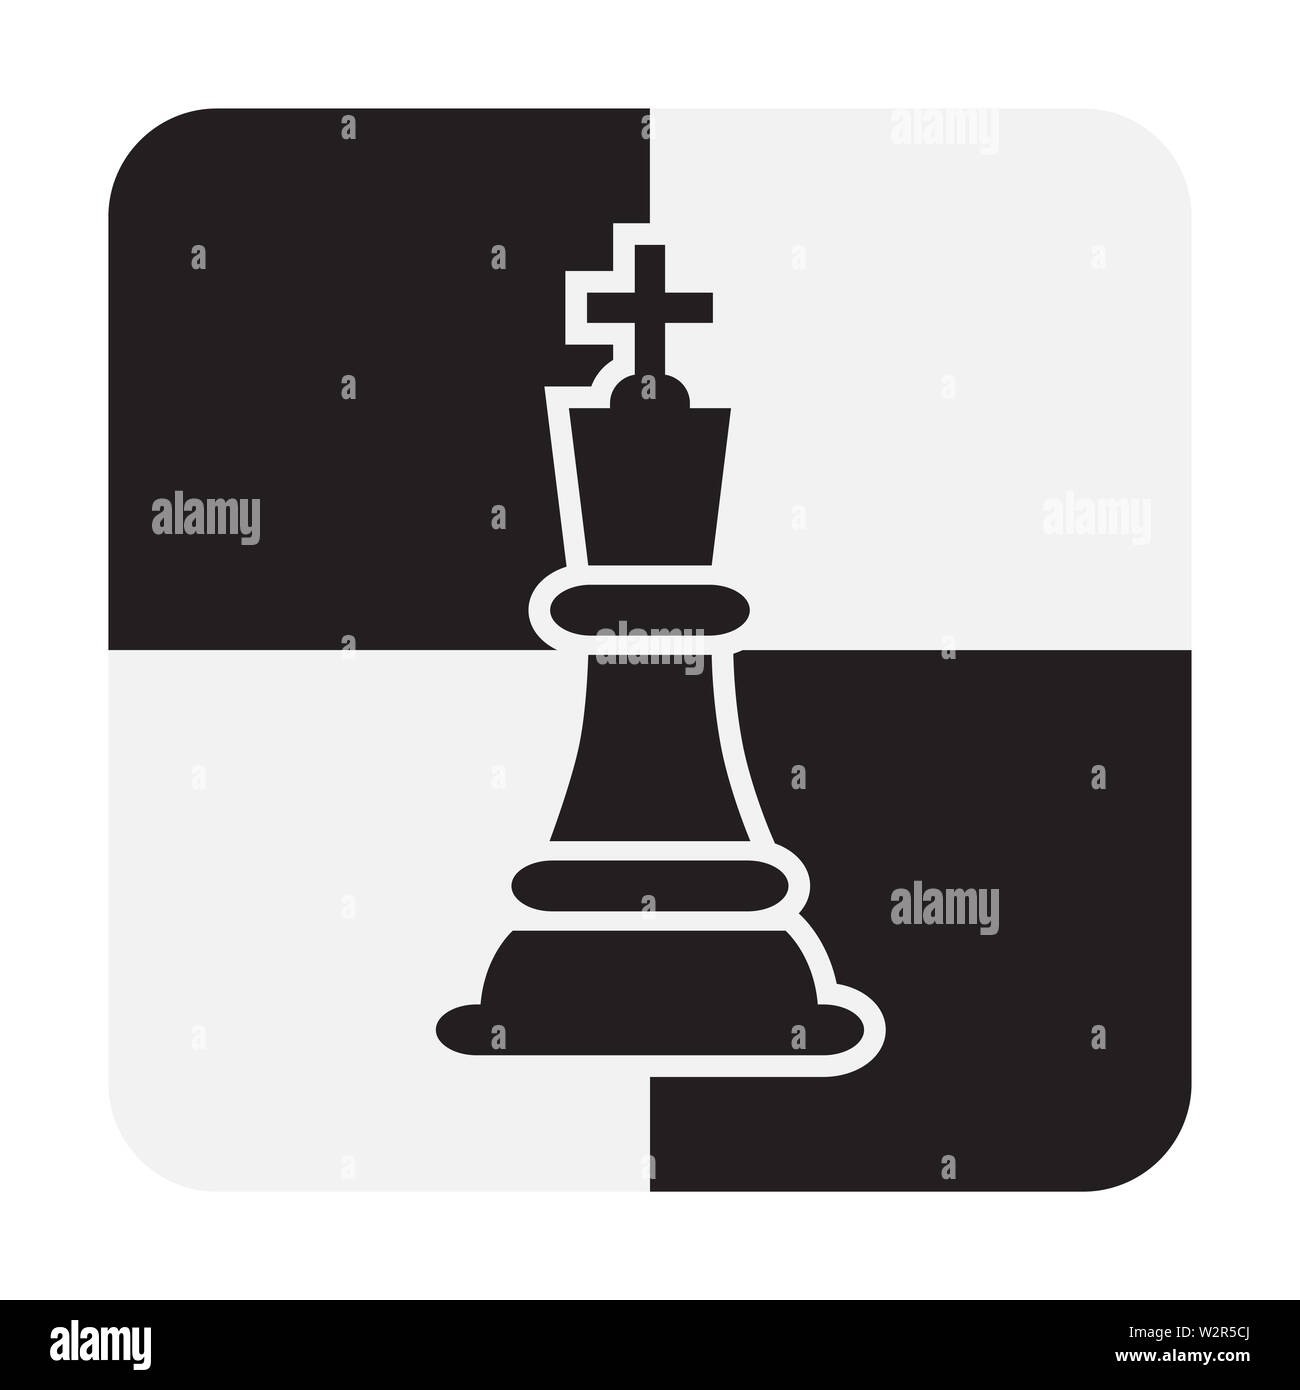 King and Queen Chess Piece Silhouette Graphic by martcorreo